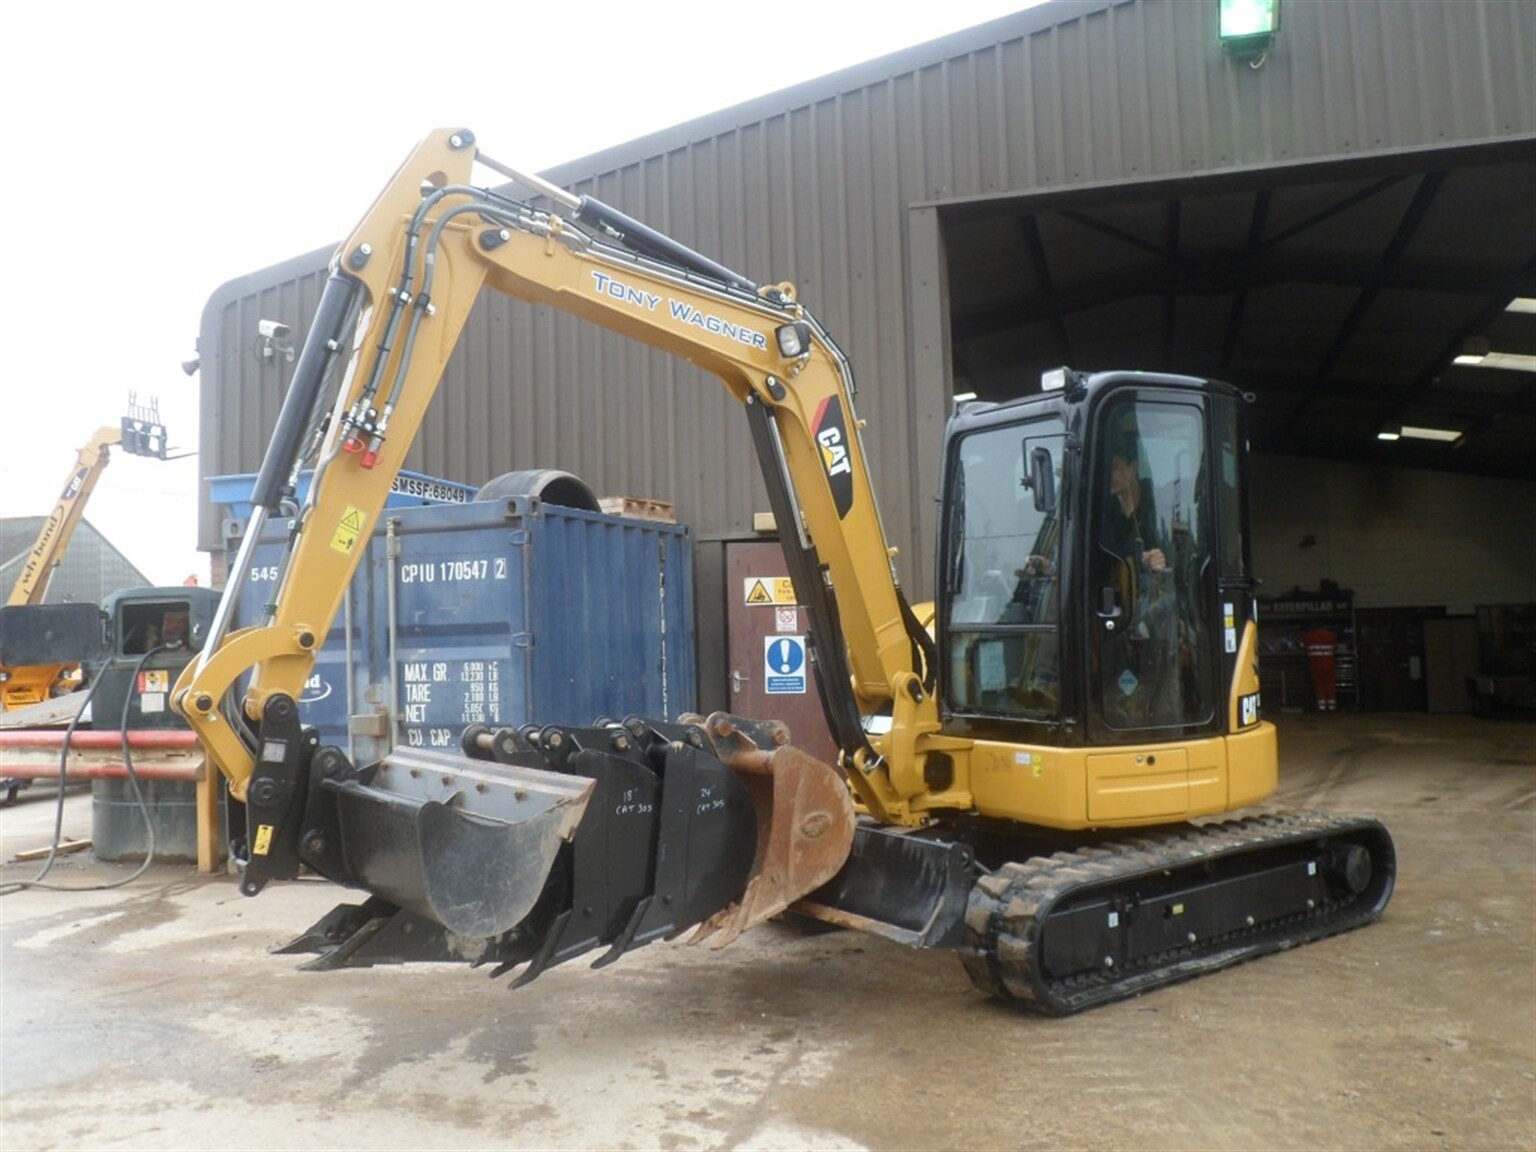 Tony Wagner Plant Hire adds a 5 ton Cat to the pride